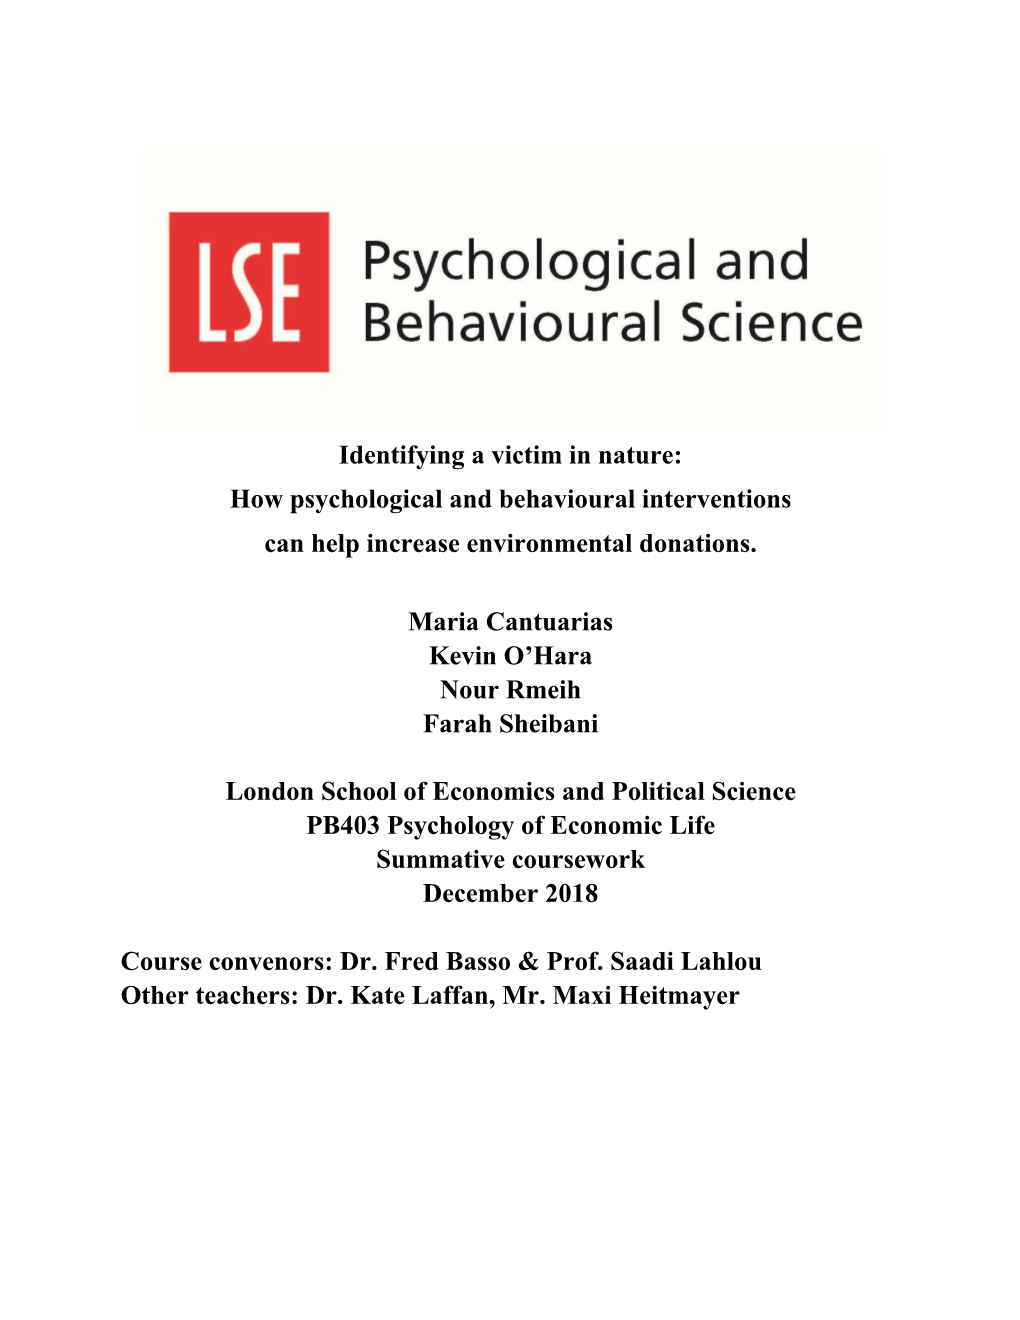 Identifying a Victim in Nature: How Psychological and Behavioural Interventions Can Help Increase Environmental Donations